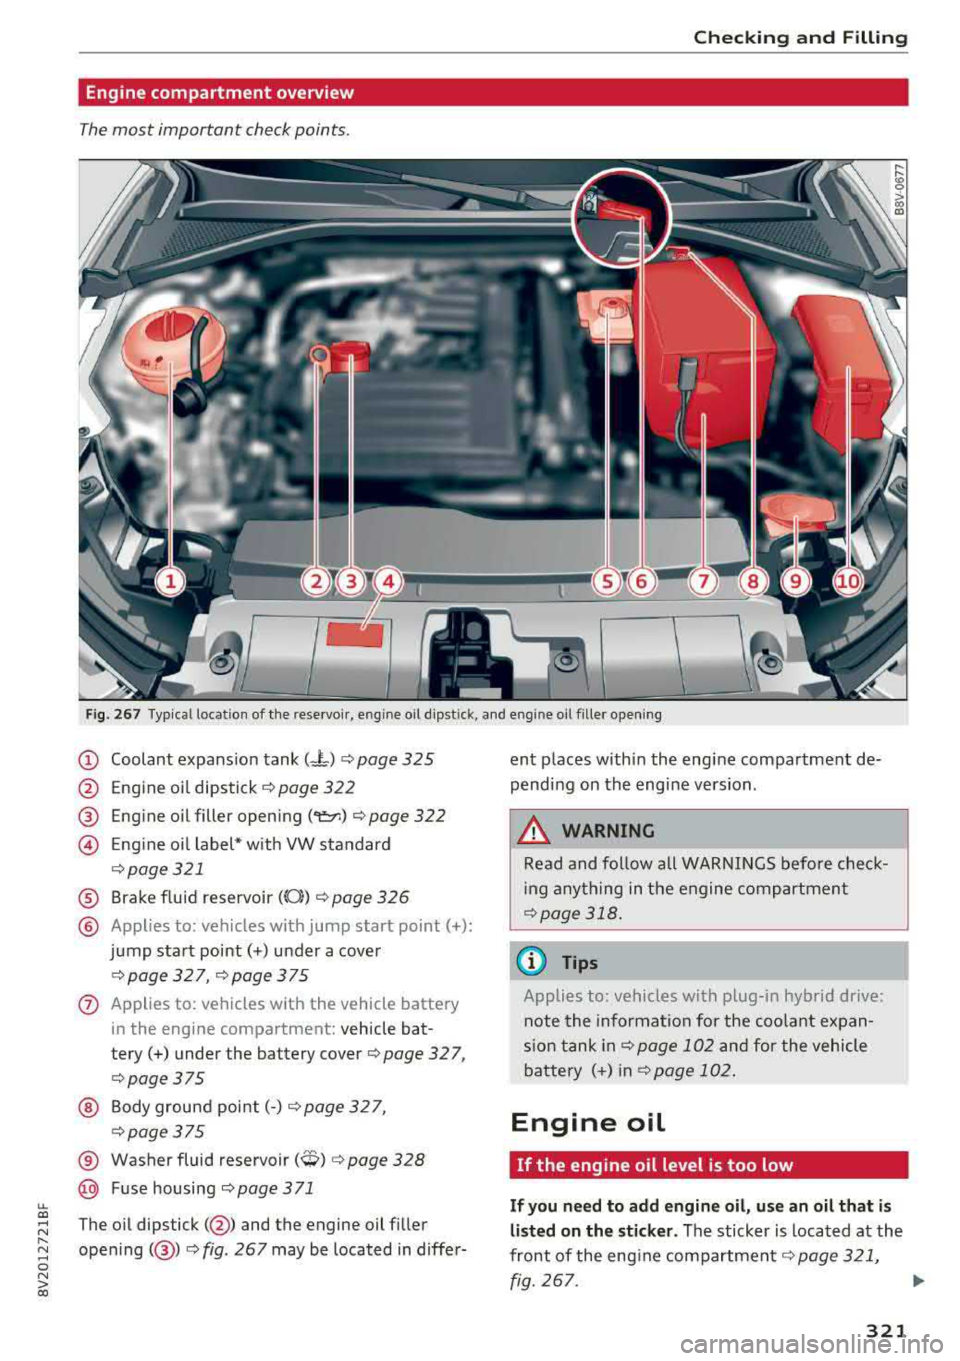 AUDI S3 SEDAN 2018  Owners Manual LL co .... N 
" N .... 0 N > co 
Checking  and  Filling 
Engine  compartment  overview 
The most  important  check points . 
Fig . 267 Typical  location  of the reservoi r,  engine  oil d ipst ick, an